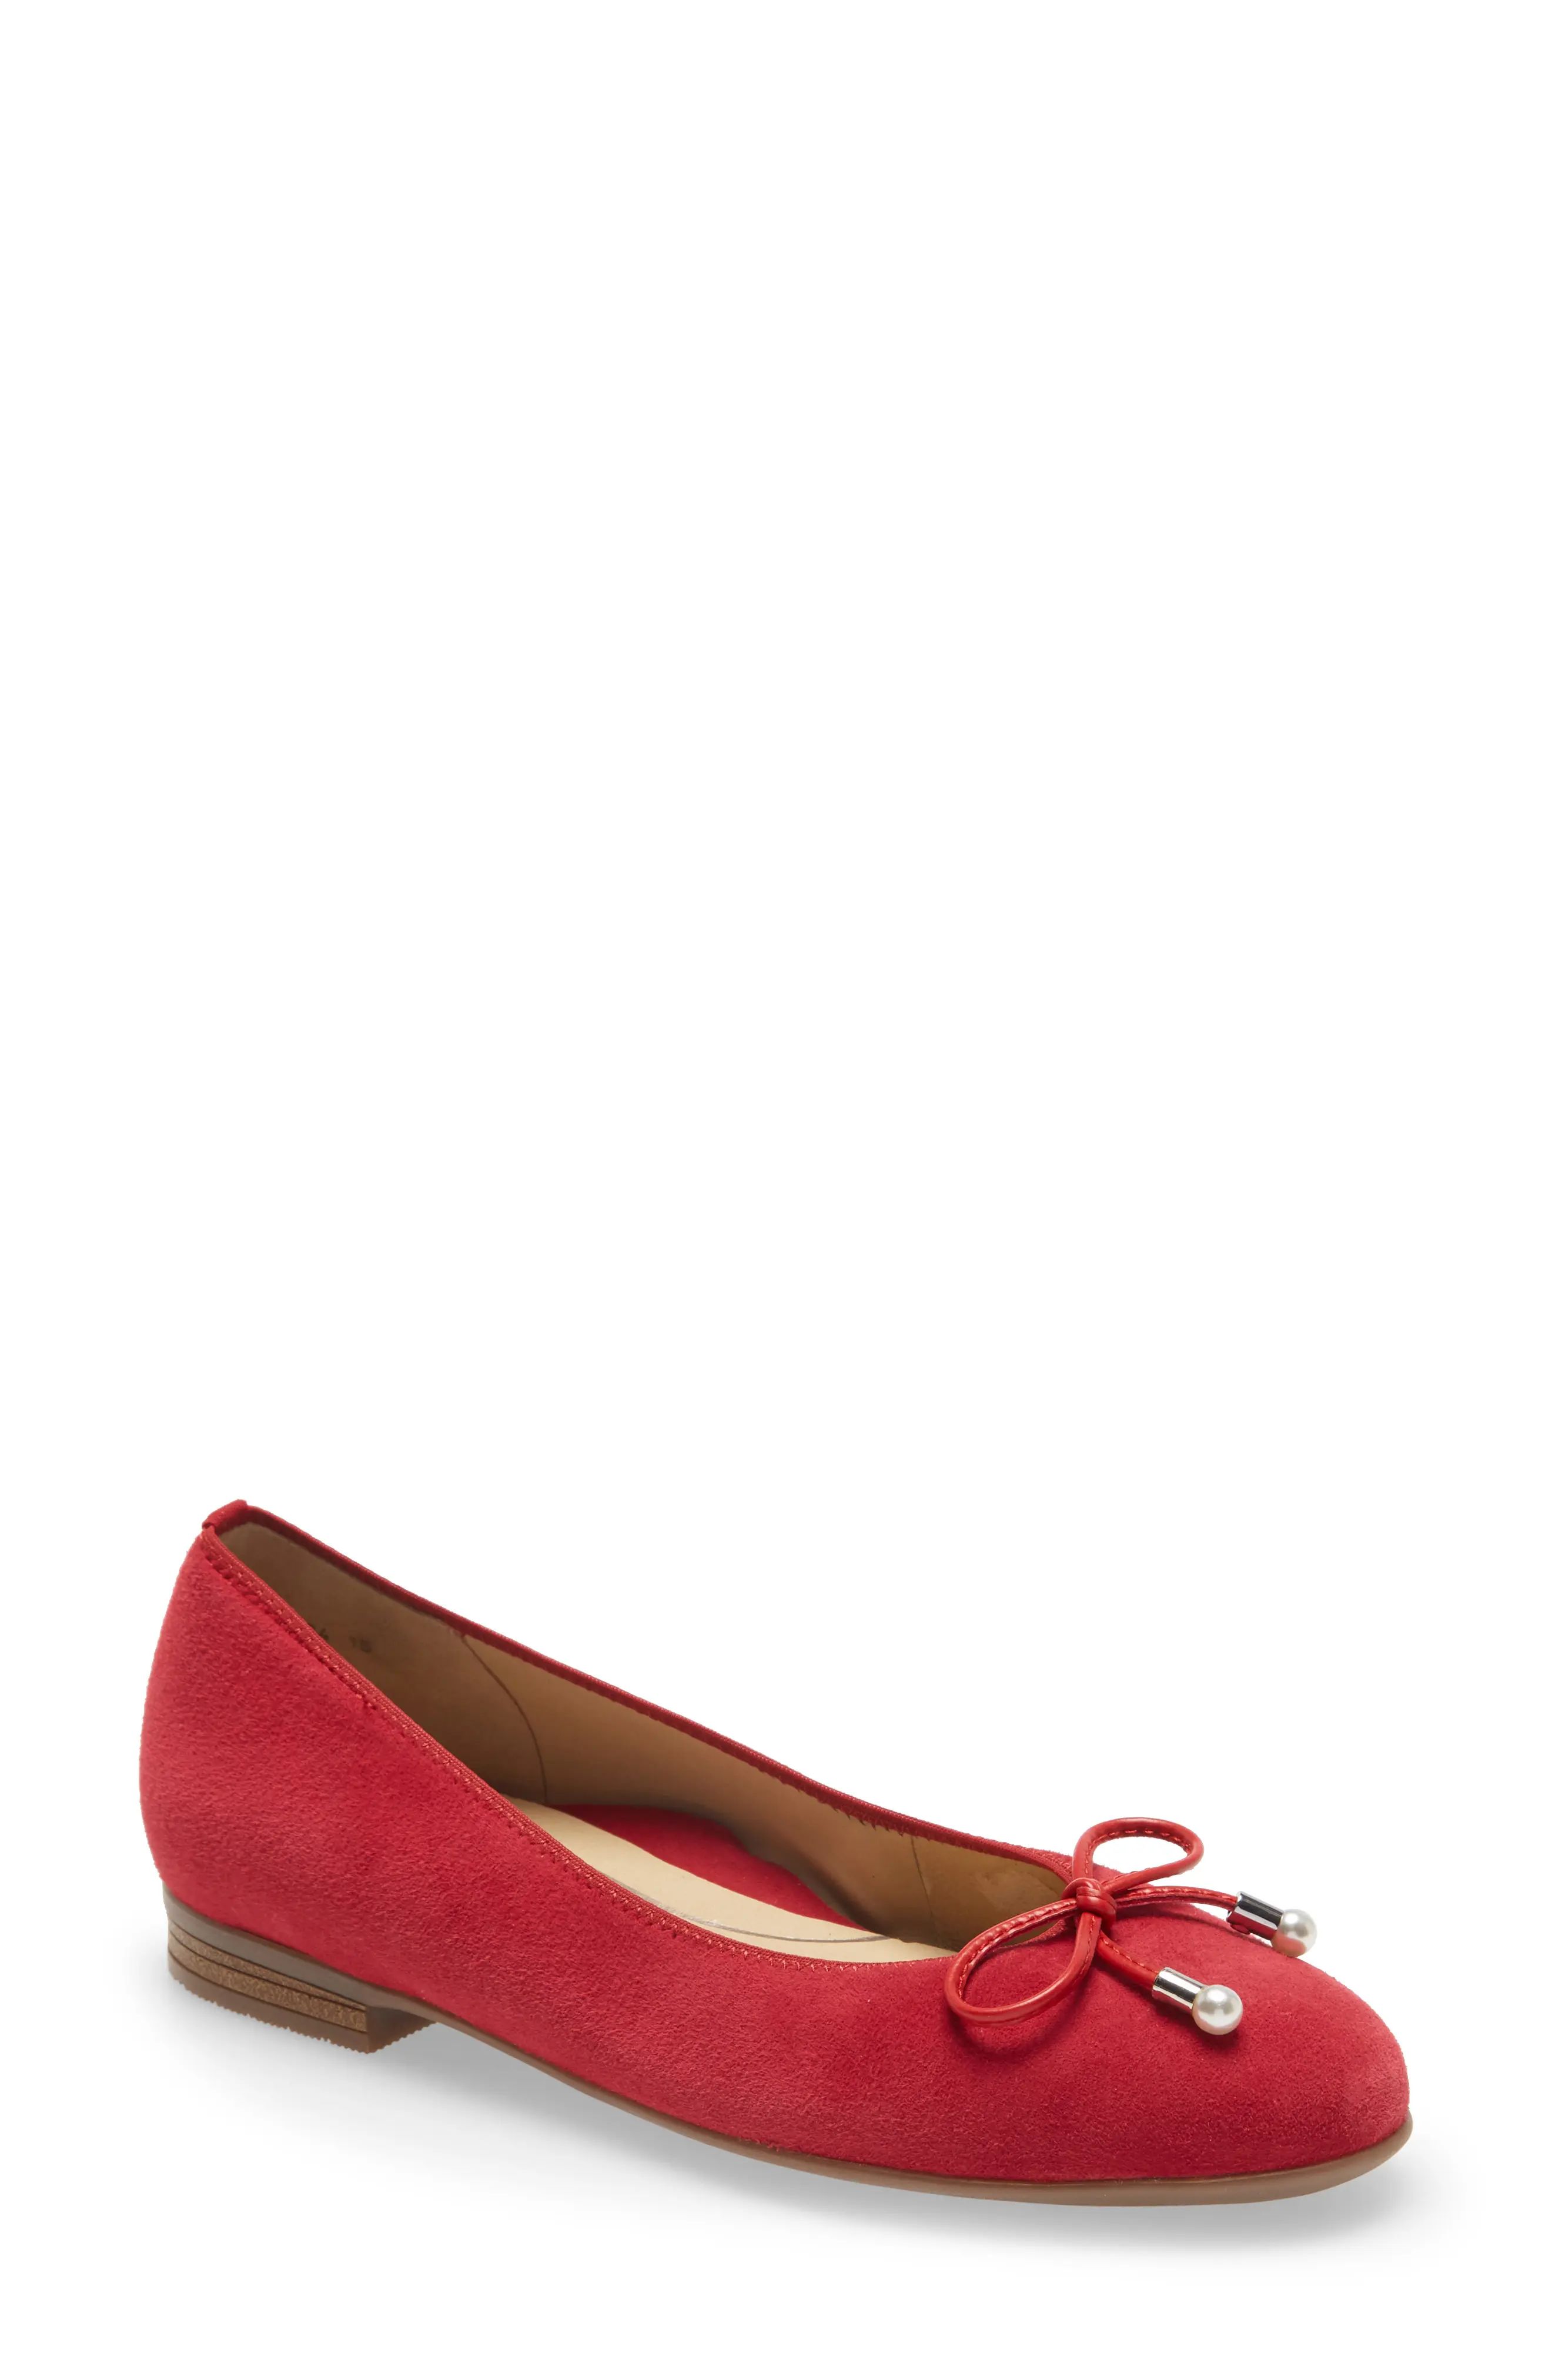 ara Scout Flat in Red Suede at Nordstrom, Size 8 | Nordstrom